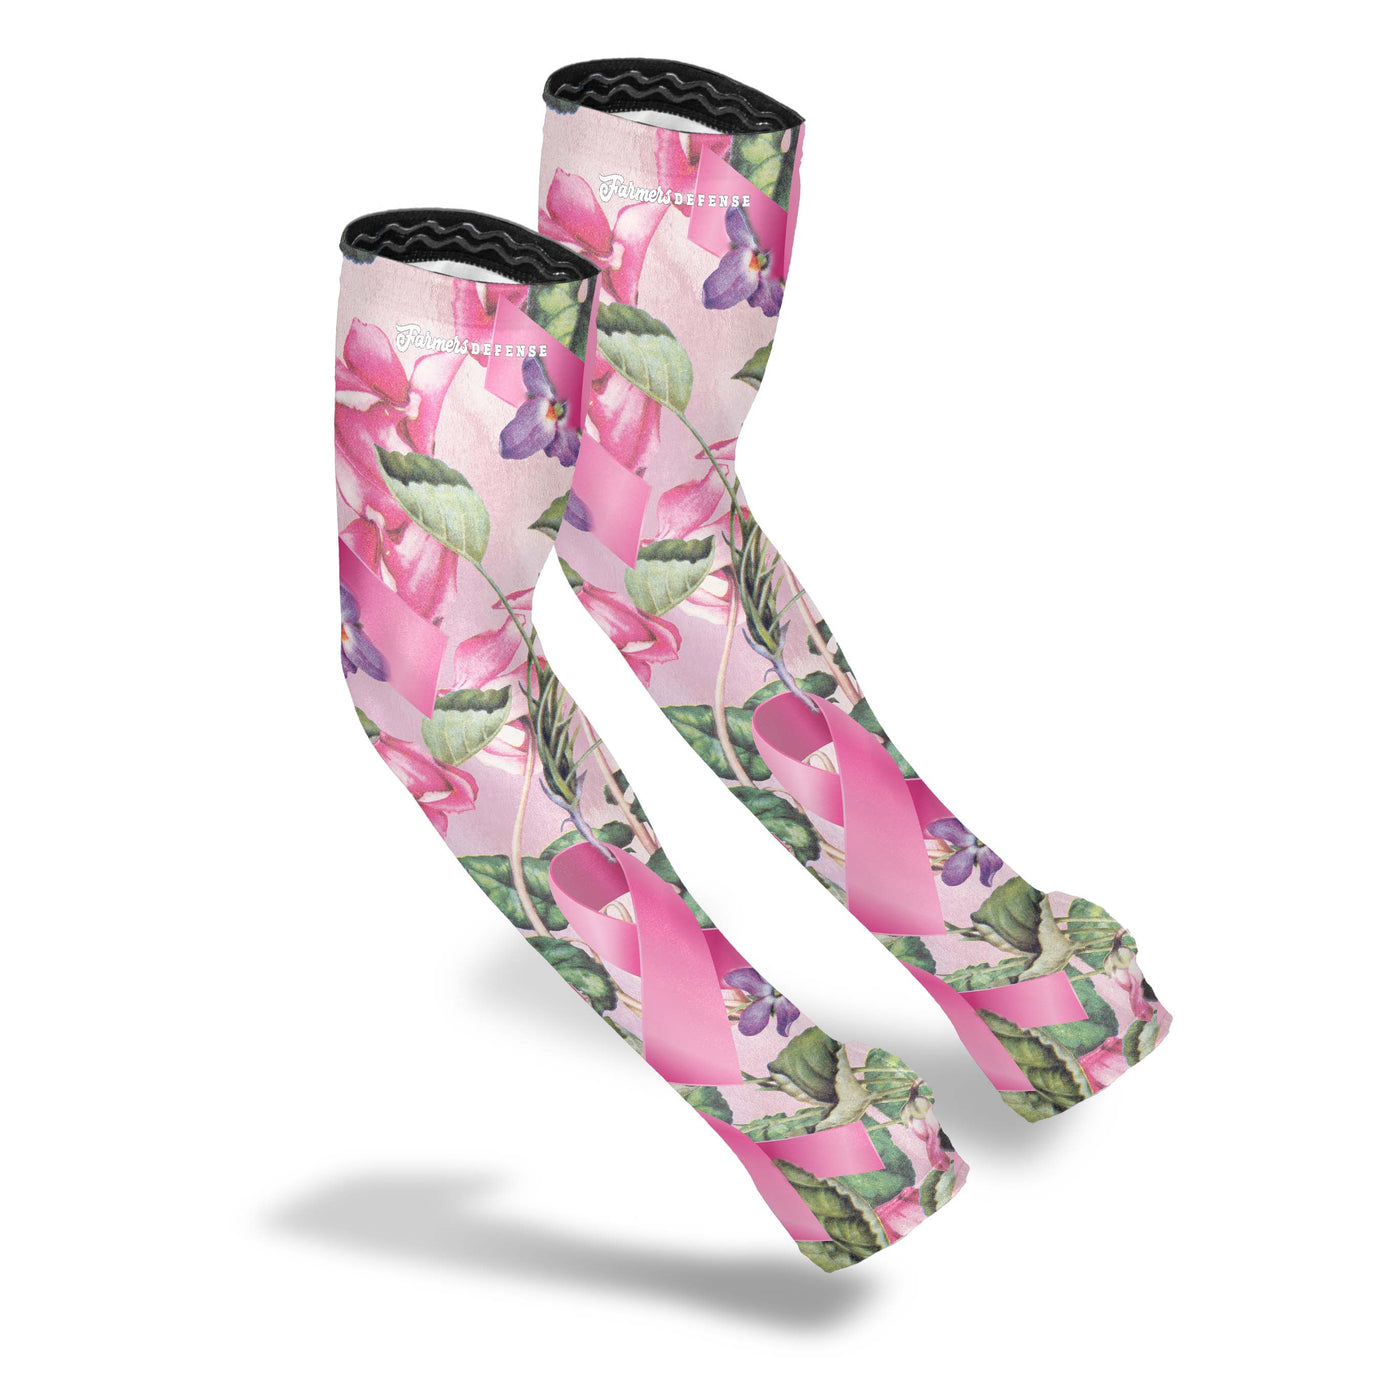 Protection Sleeves - Defeat Breast Cancer - Pink Ribbon